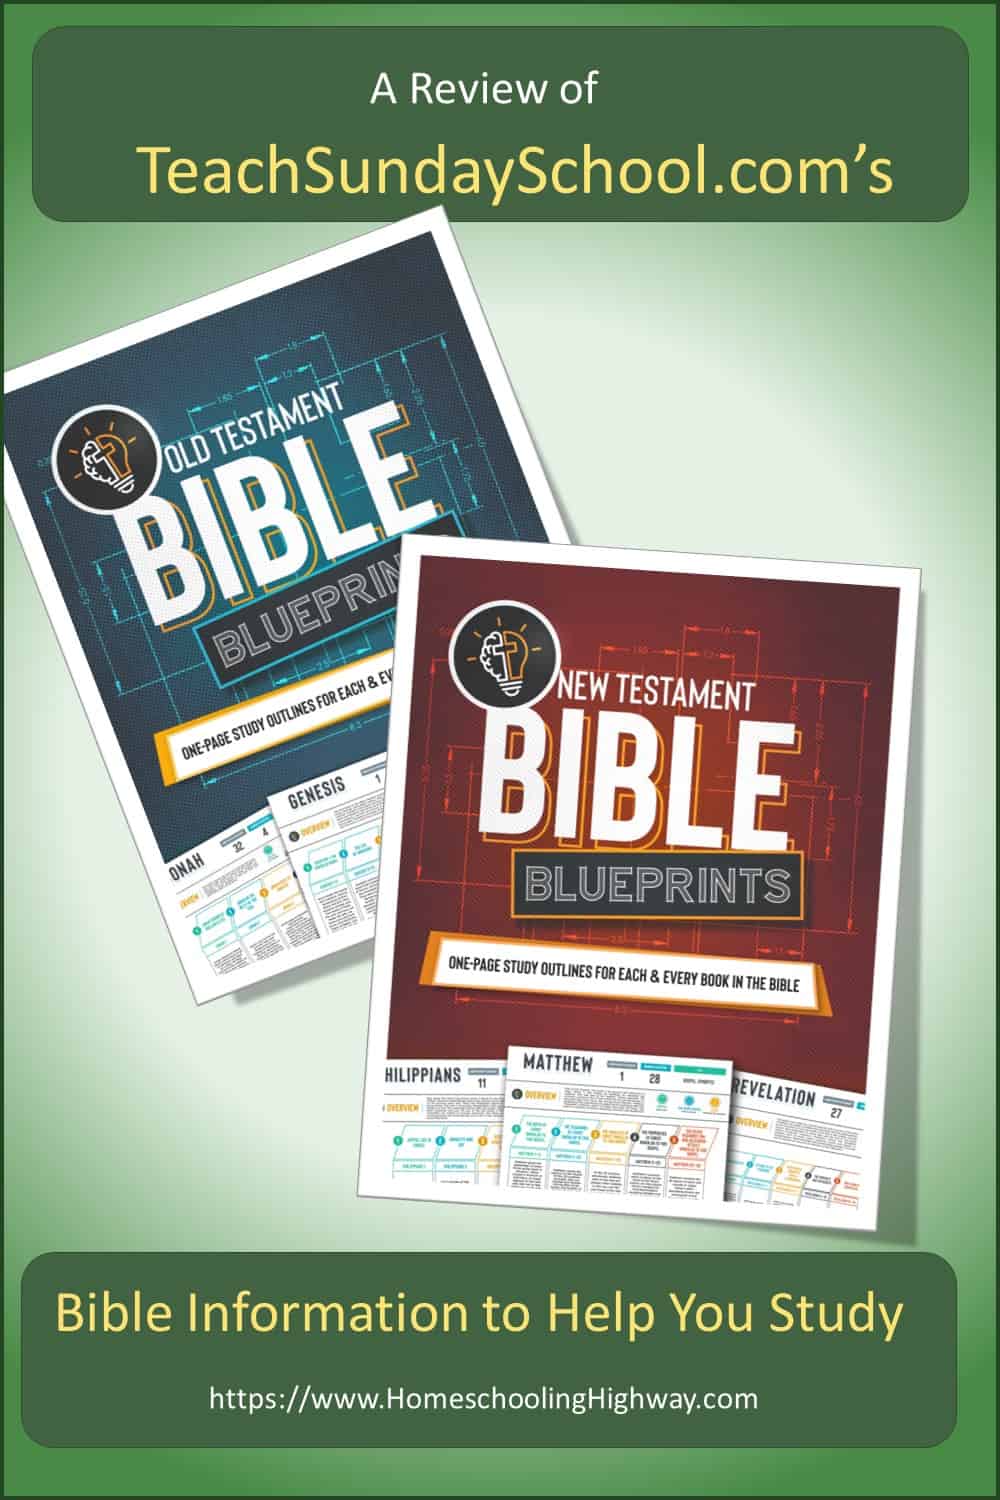 Bible Blueprint cover images from TeachSundaySchool.com. Reviewed by Homeschooling Highway